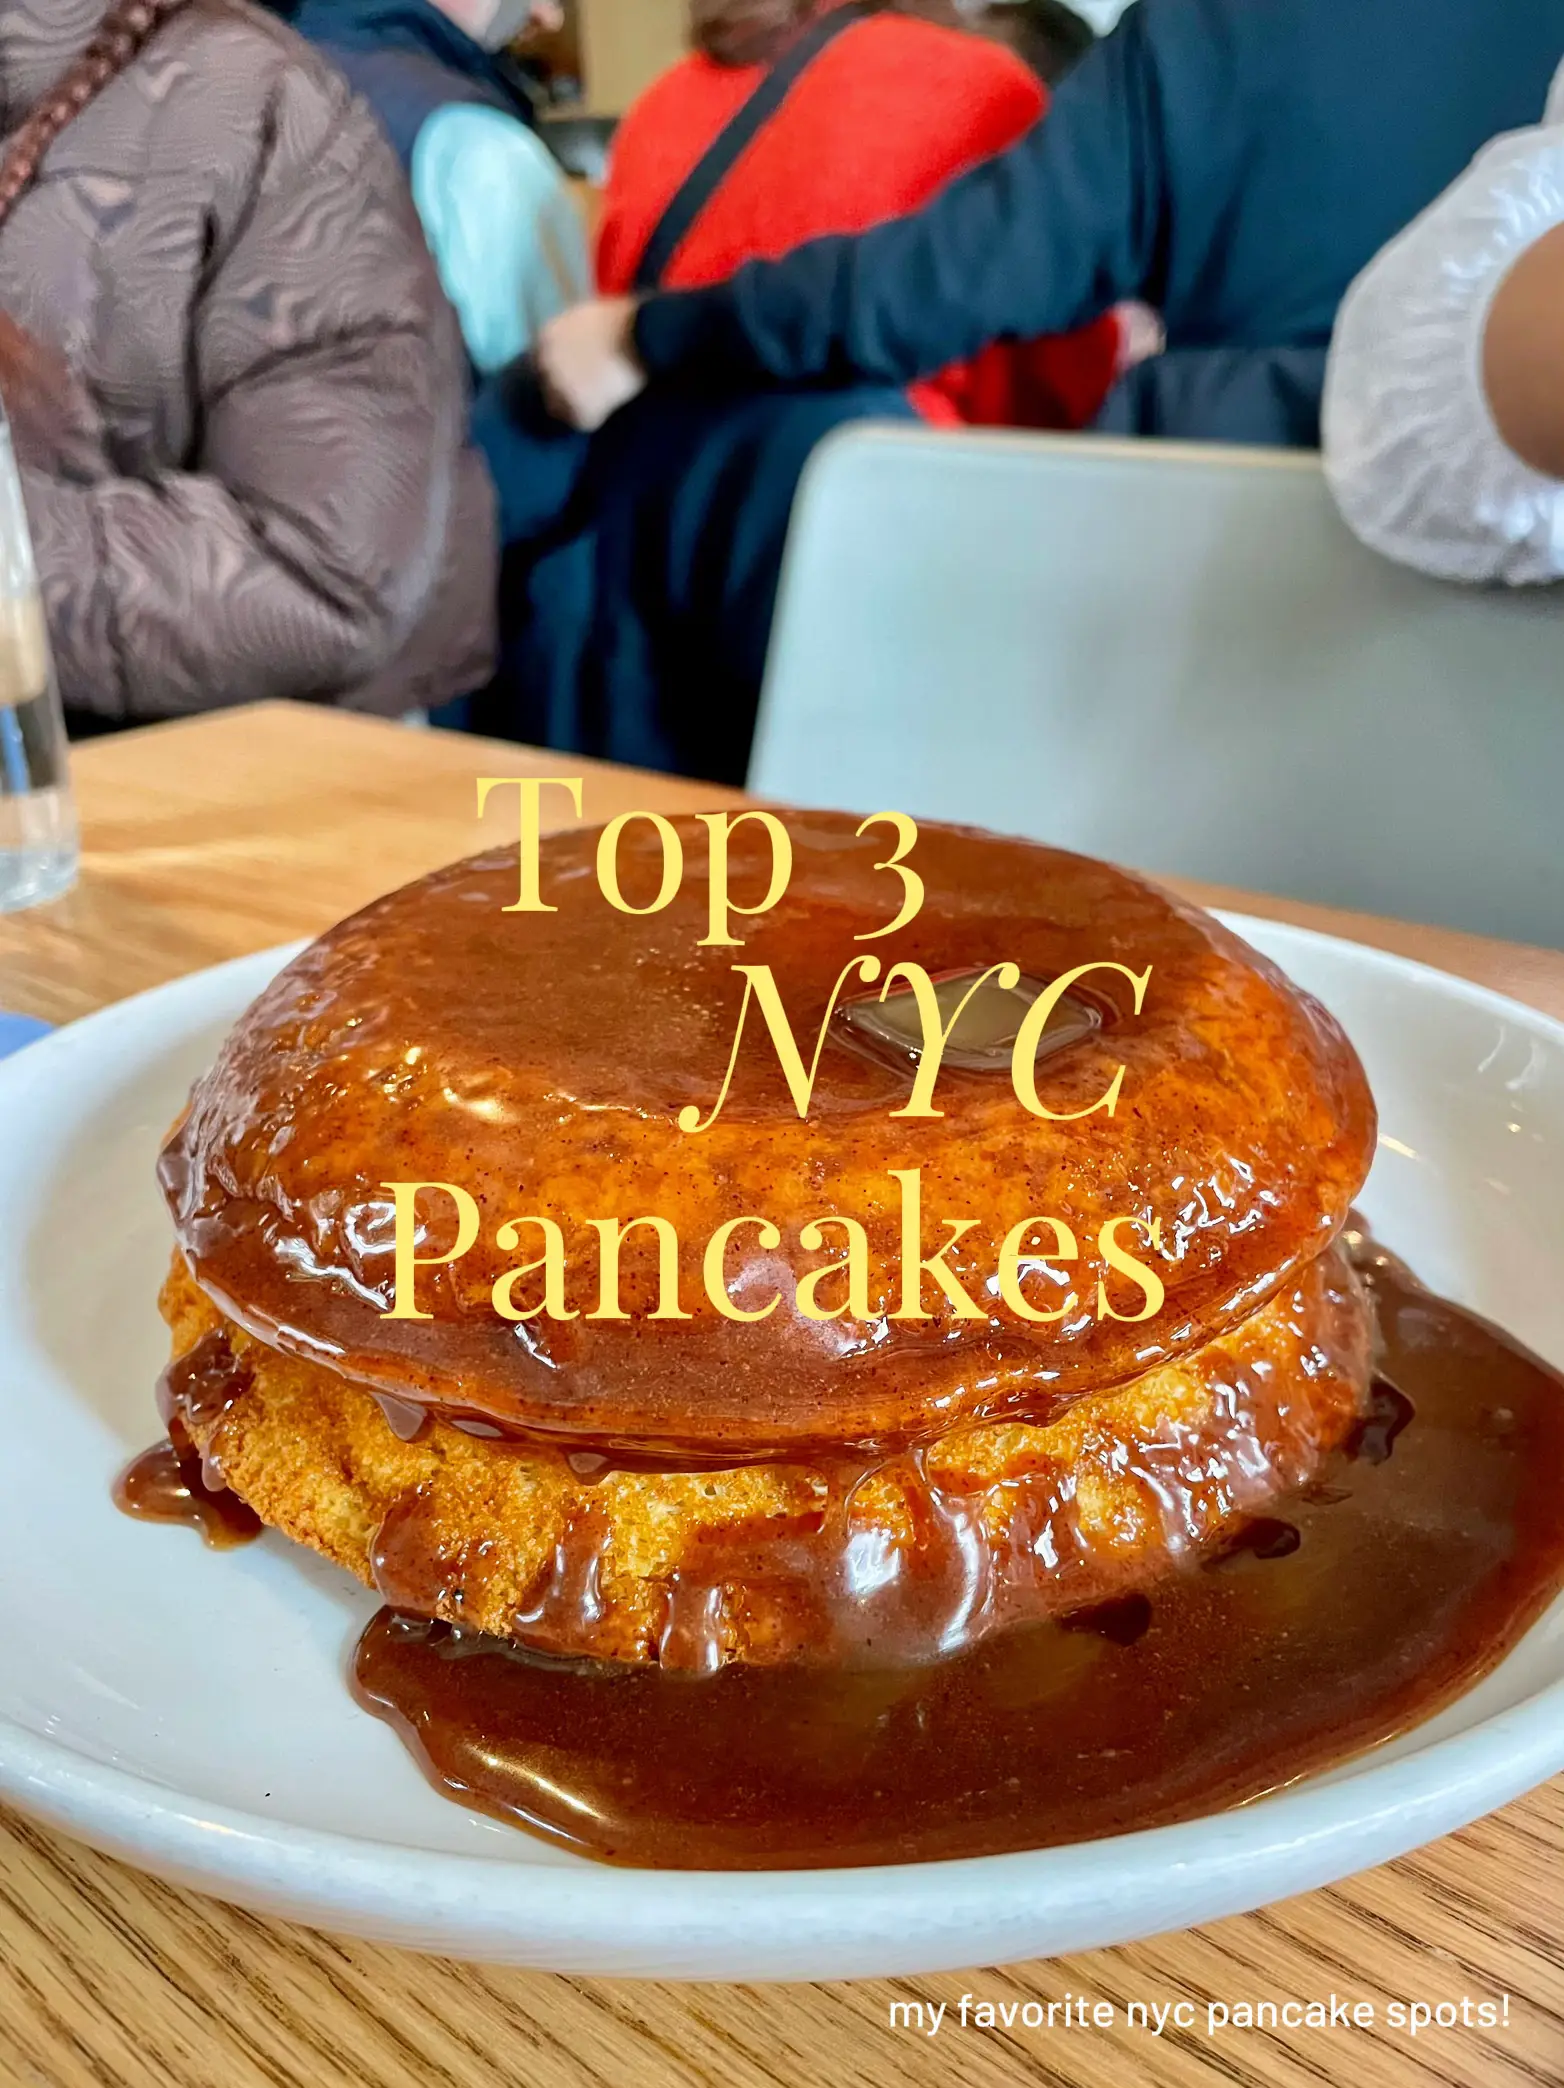 NYC Top 3 Pancakes's images